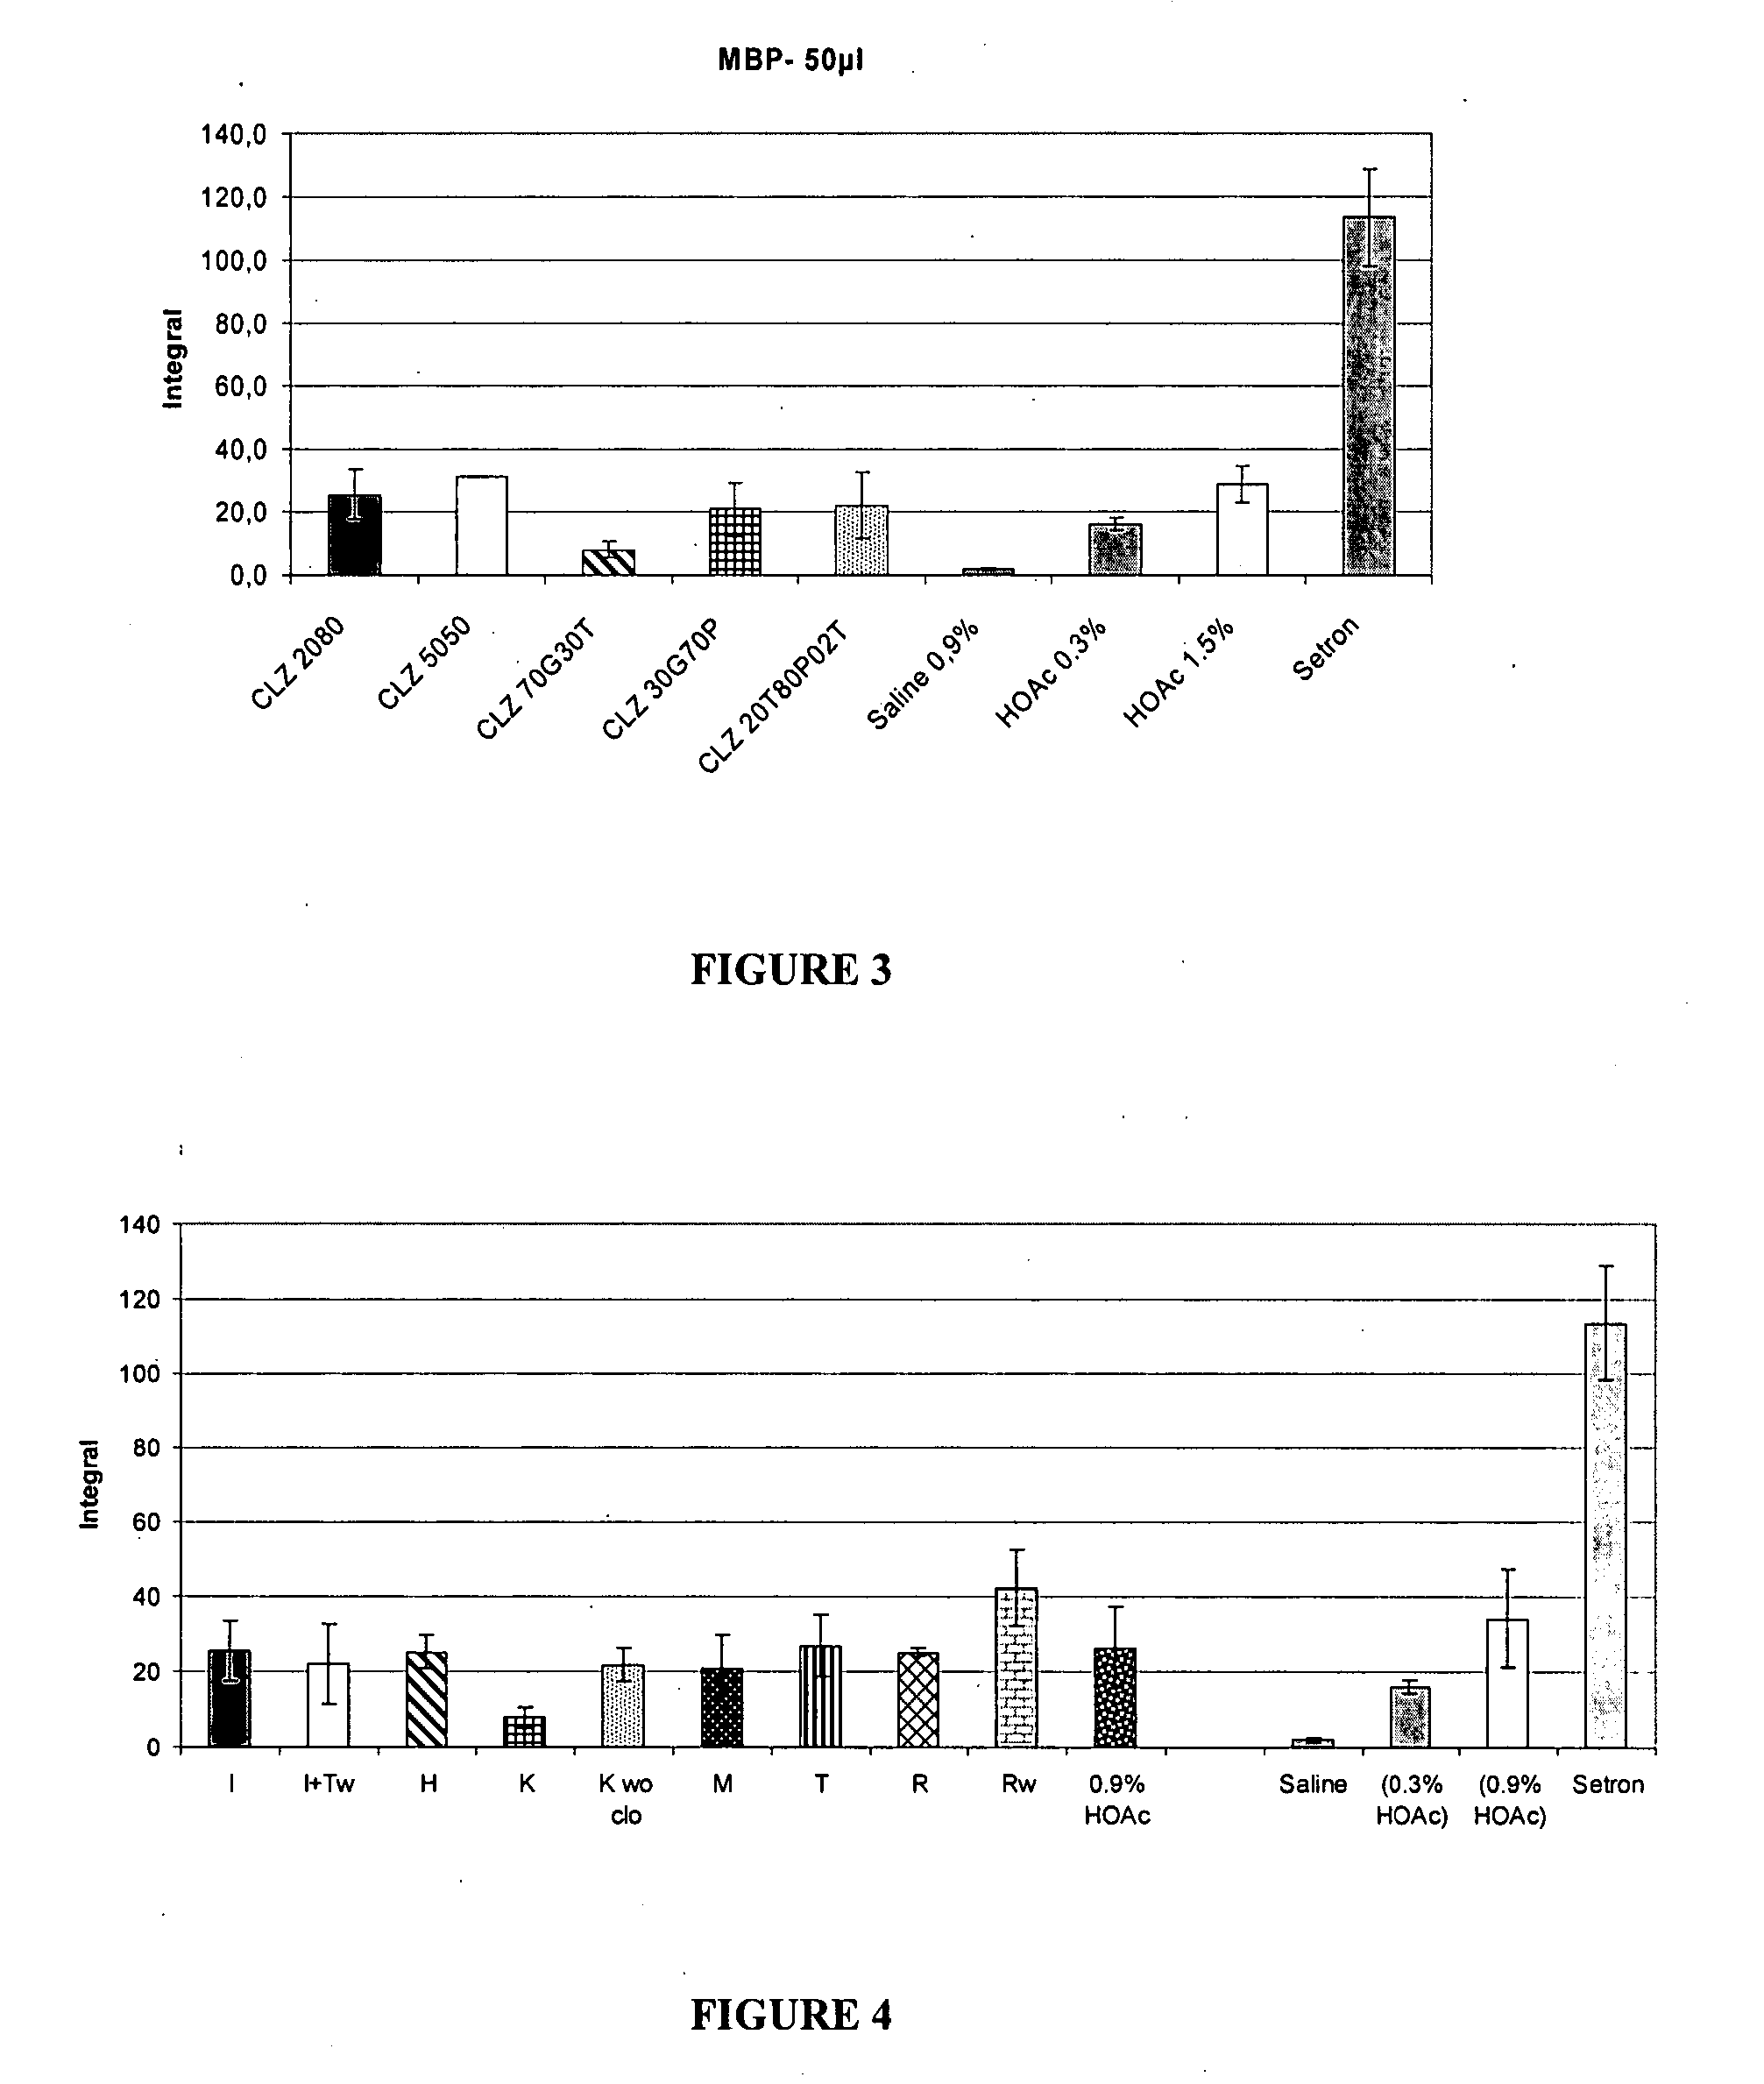 Pharmaceutical compositions of clonazepam and method of use thereof